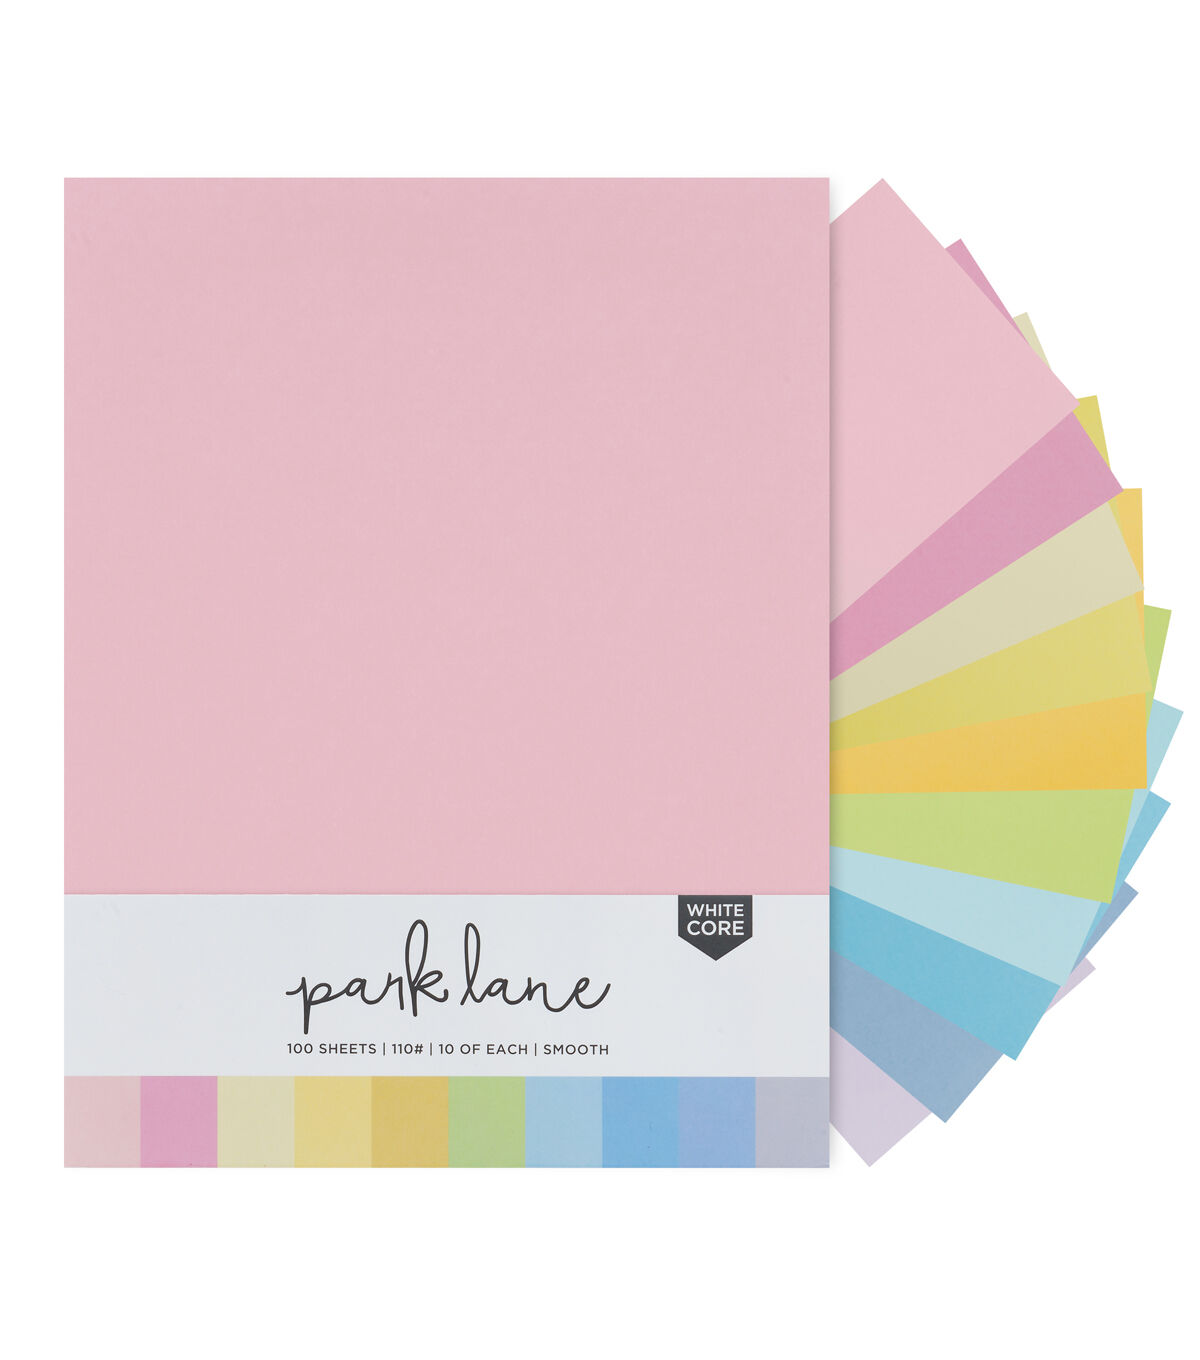 Cardstock 8.5 x 11 Paper Pack - 110 lb Assorted Pastel Colored Scrapbook Paper - Double Sided Card Stock for Crafts, Embossing, Cardmaking - 100